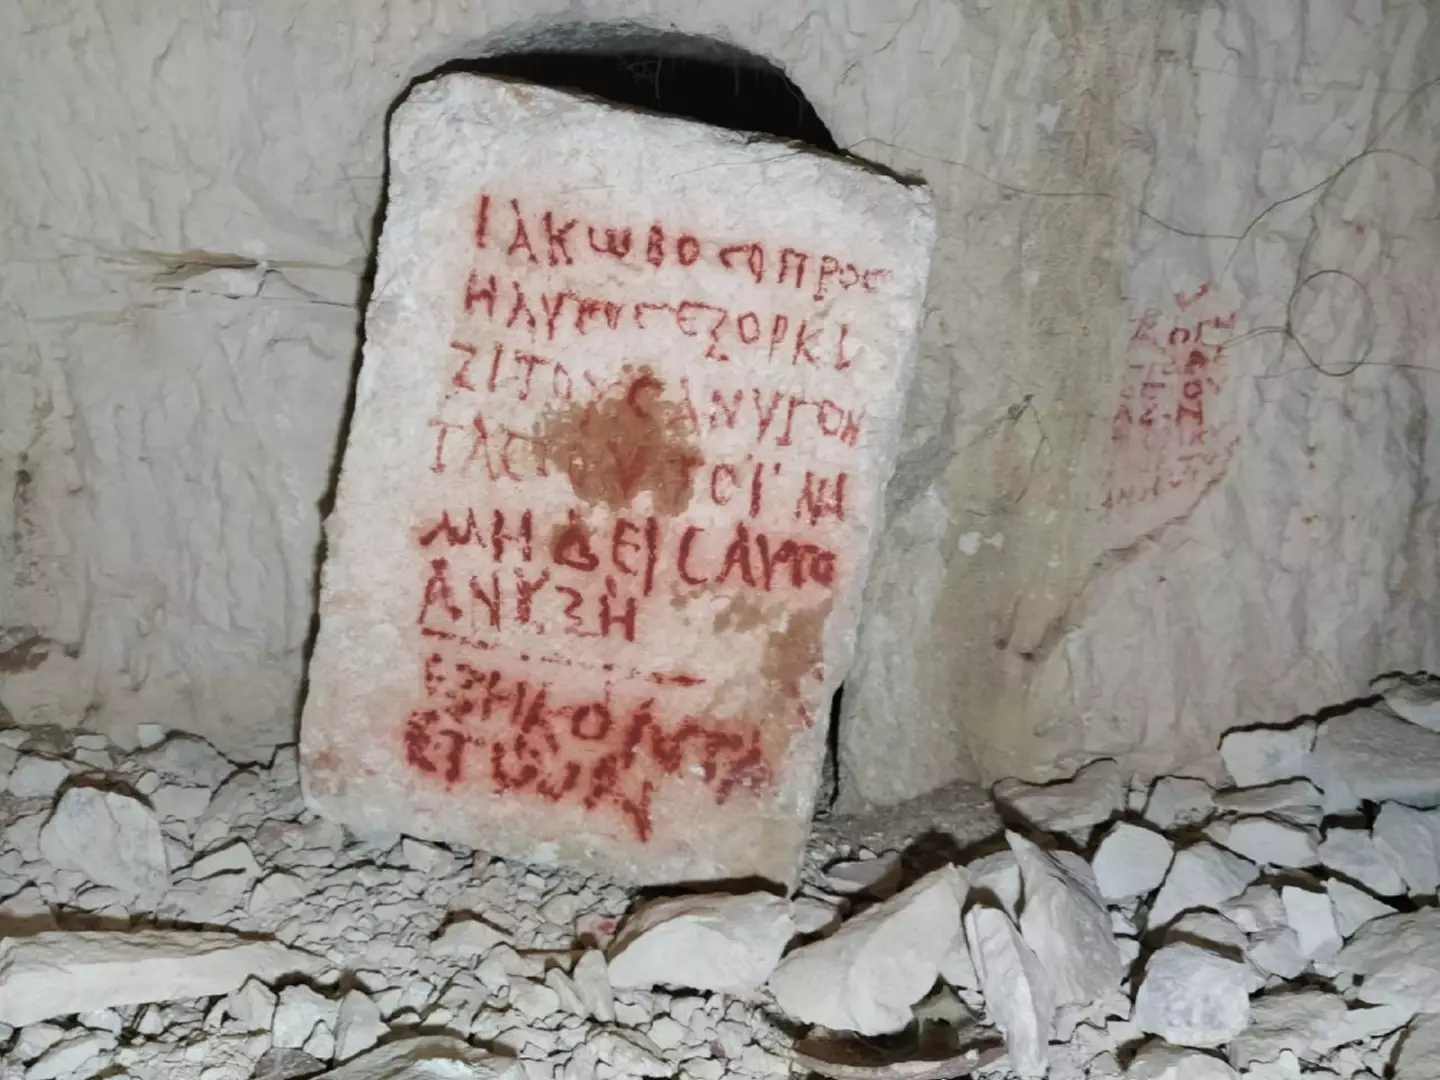 The inscription is written in blood-red.